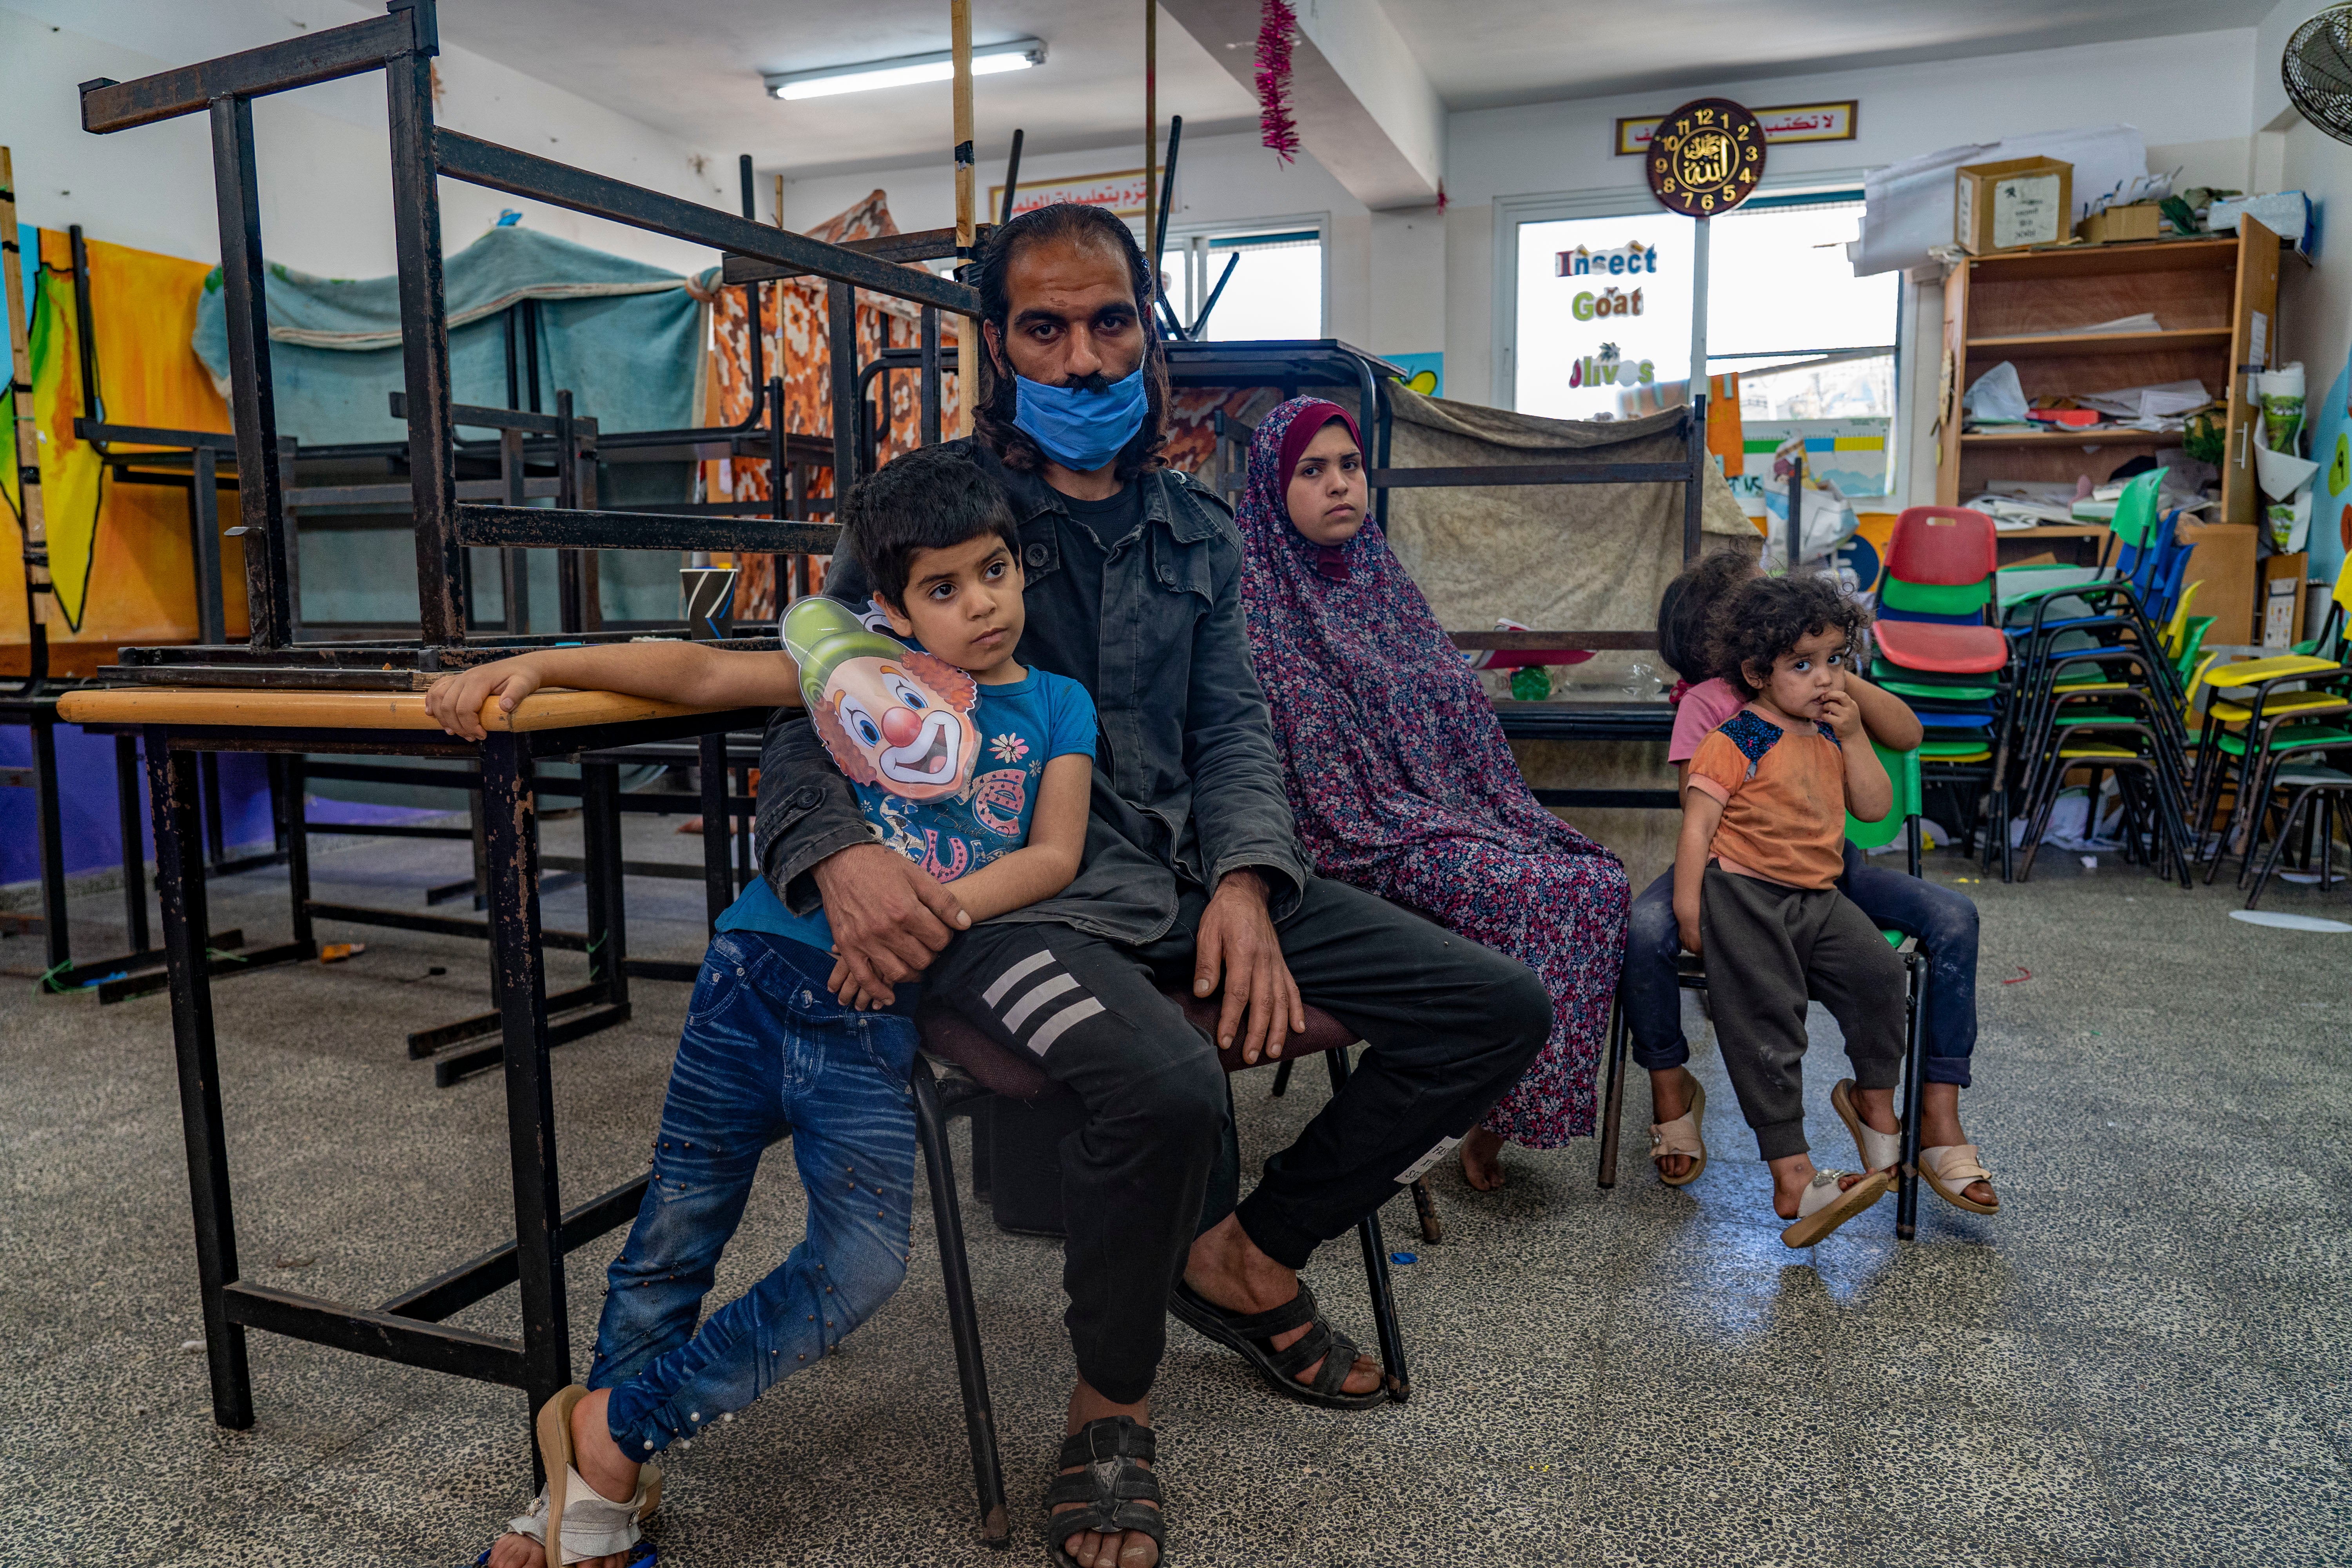 Harb Sukkar, who lost his home in 2012 and 2014, is homeless again and living in a UNRWA school